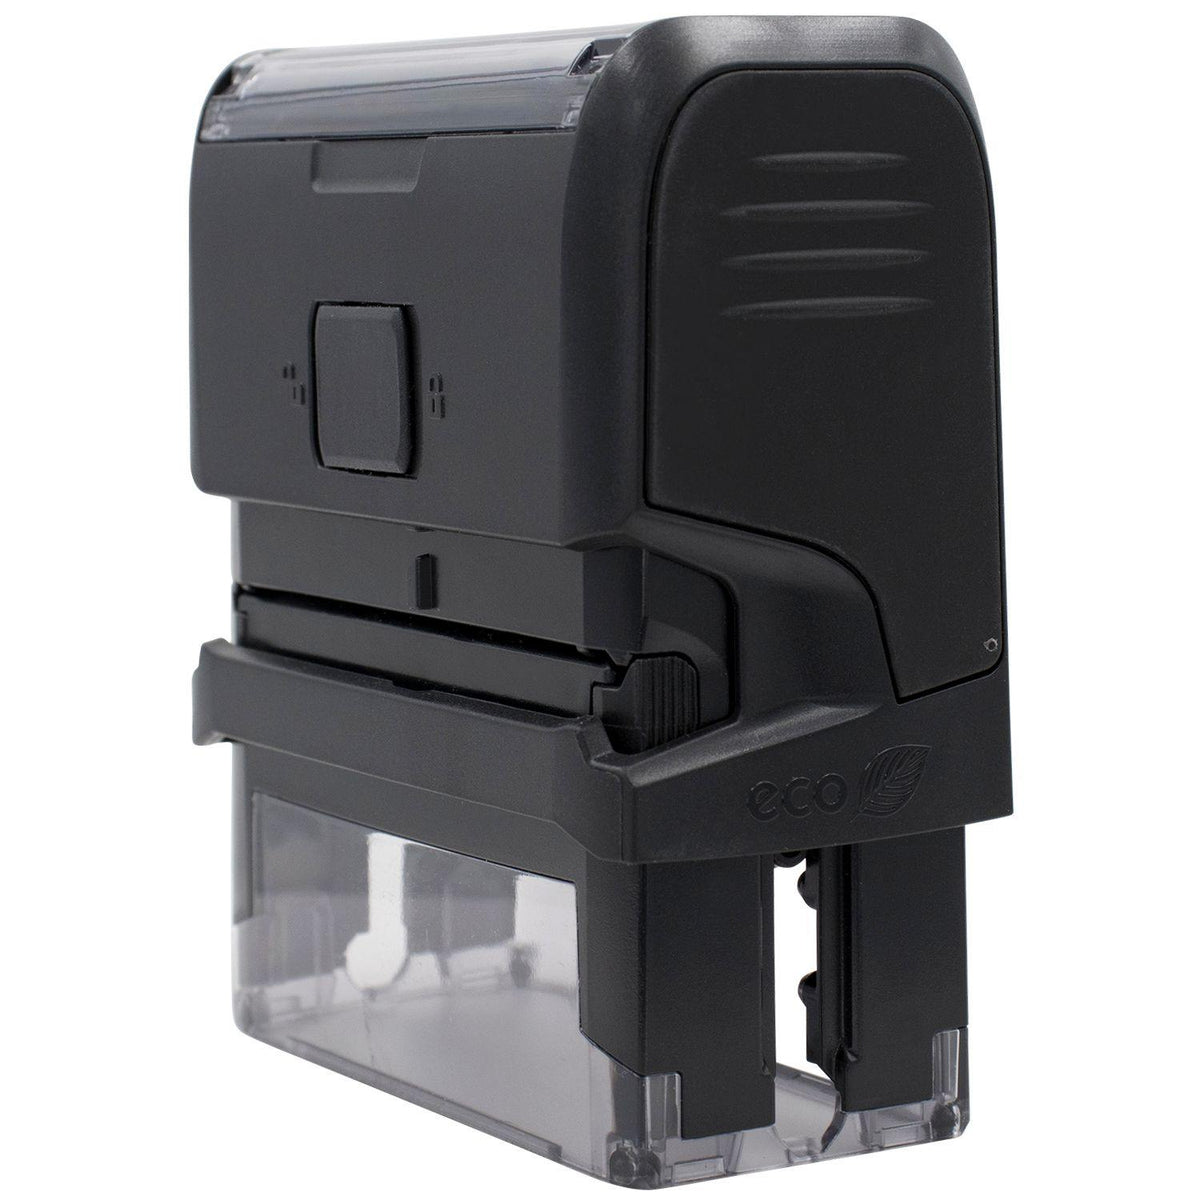 Side View of Large Self-Inking Confirmation of Phone Order Stamp at an Angle